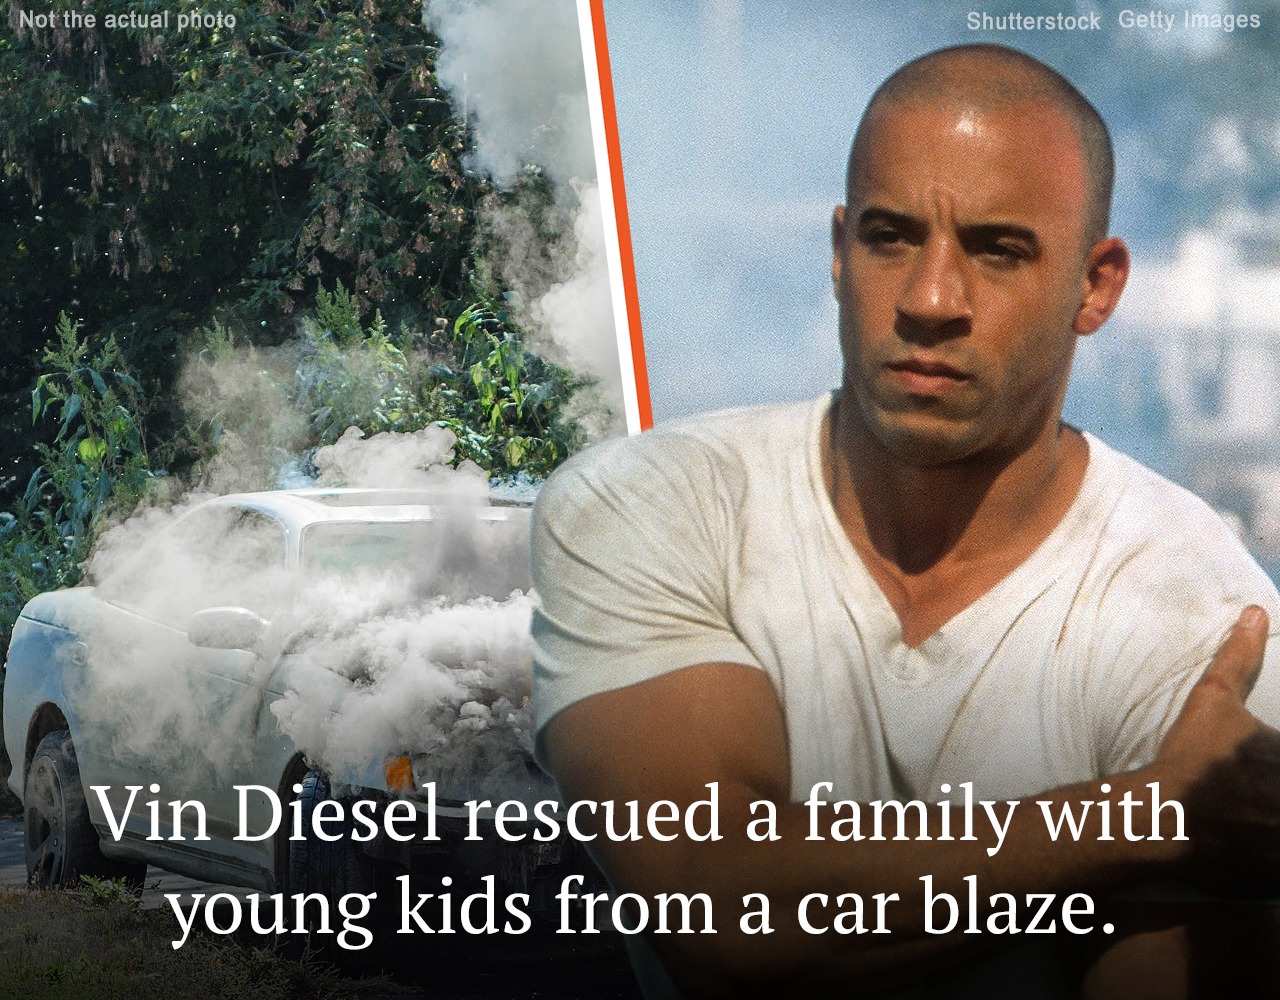 It turns out that Vin Diesel is a hero not only on the screen but also in real life – a true man of action.